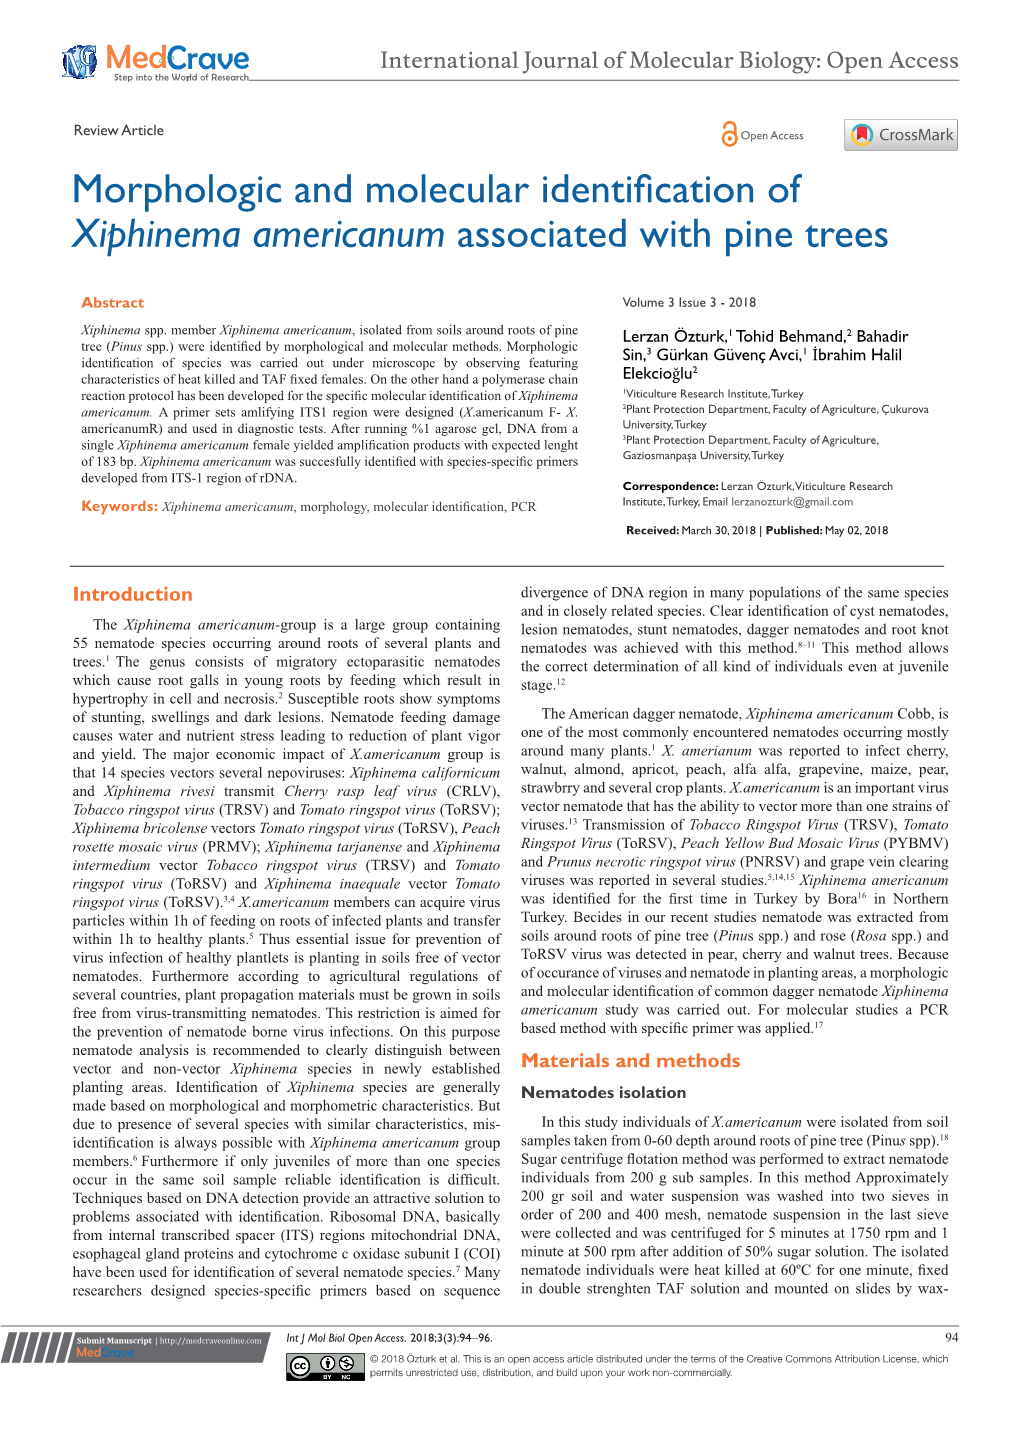 Morphologic and Molecular Identification of Xiphinema Americanum Associated with Pine Trees